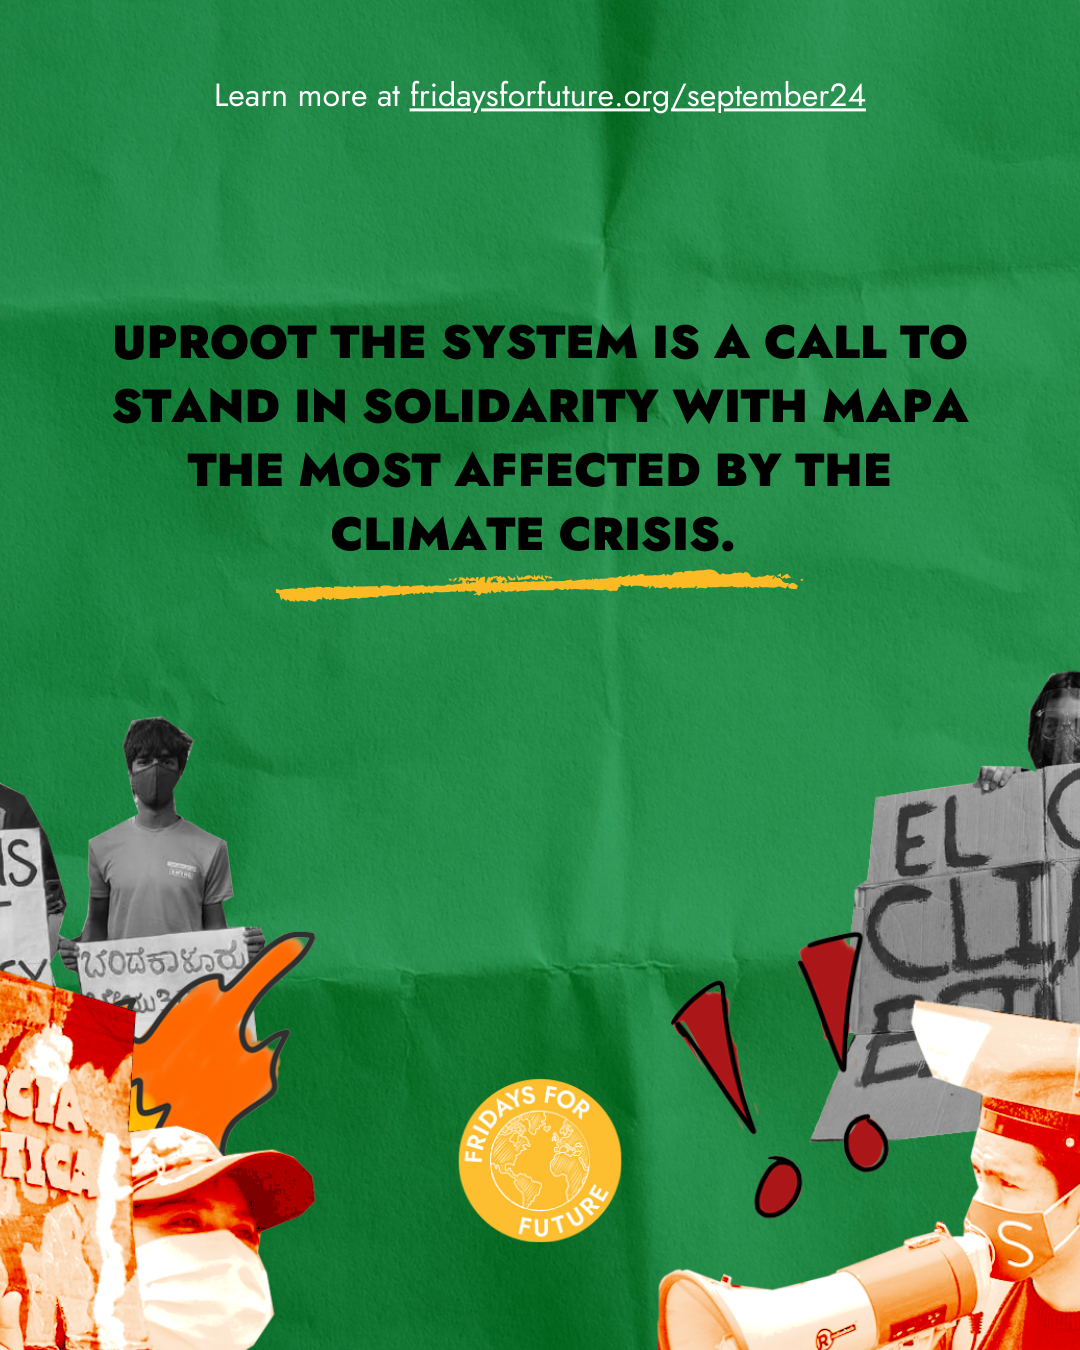 🤔Have you wondered what do we mean when we say #UprootTheSystem?